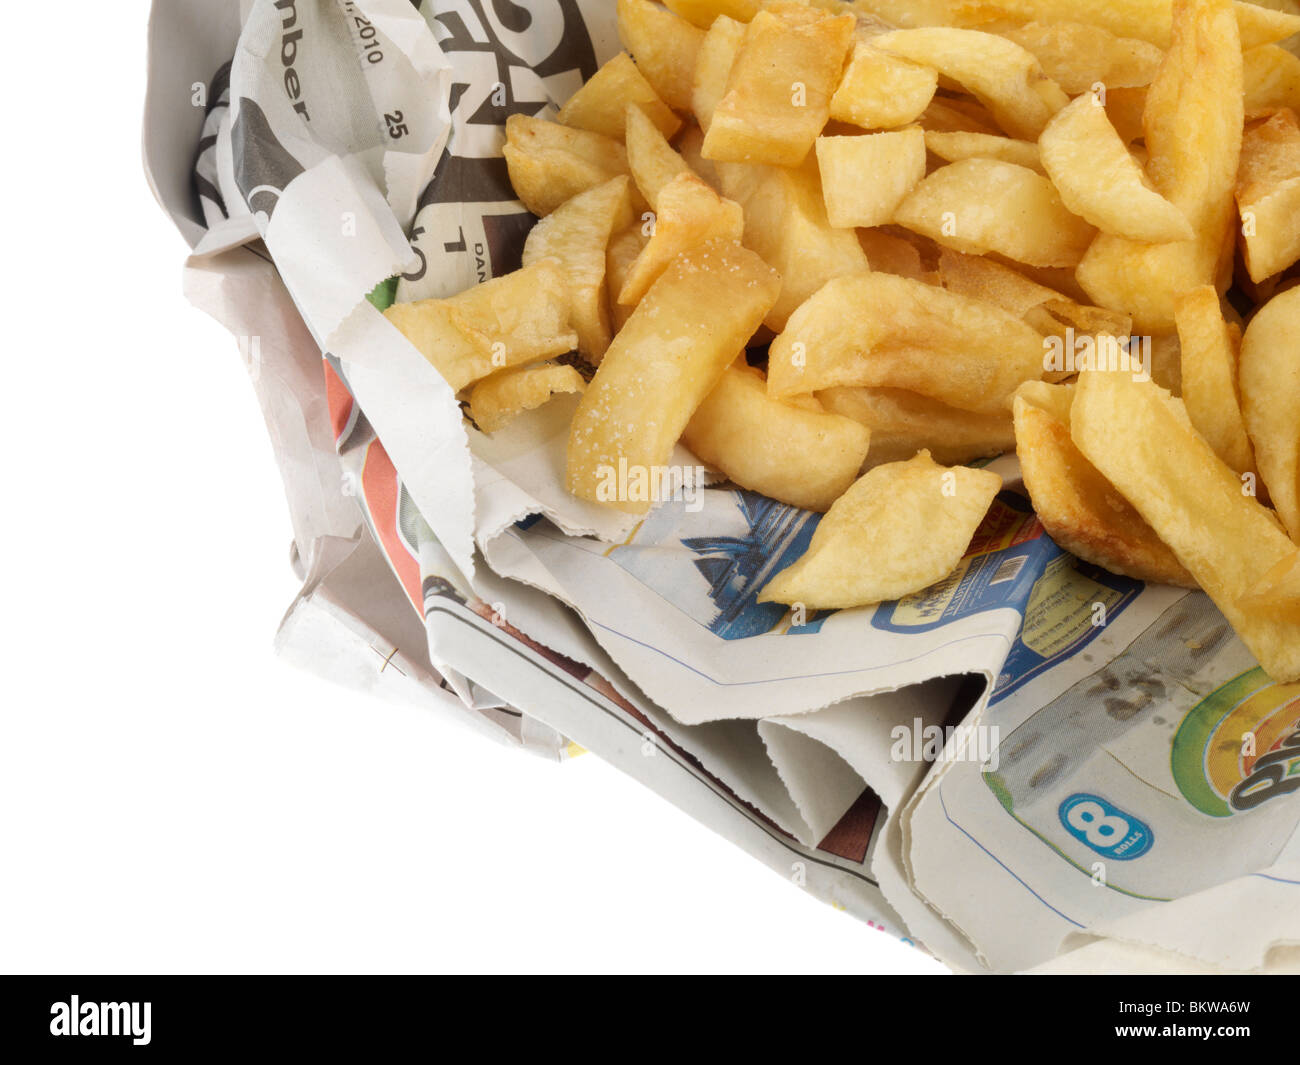 Battered Sausage and Chips Stock Photo